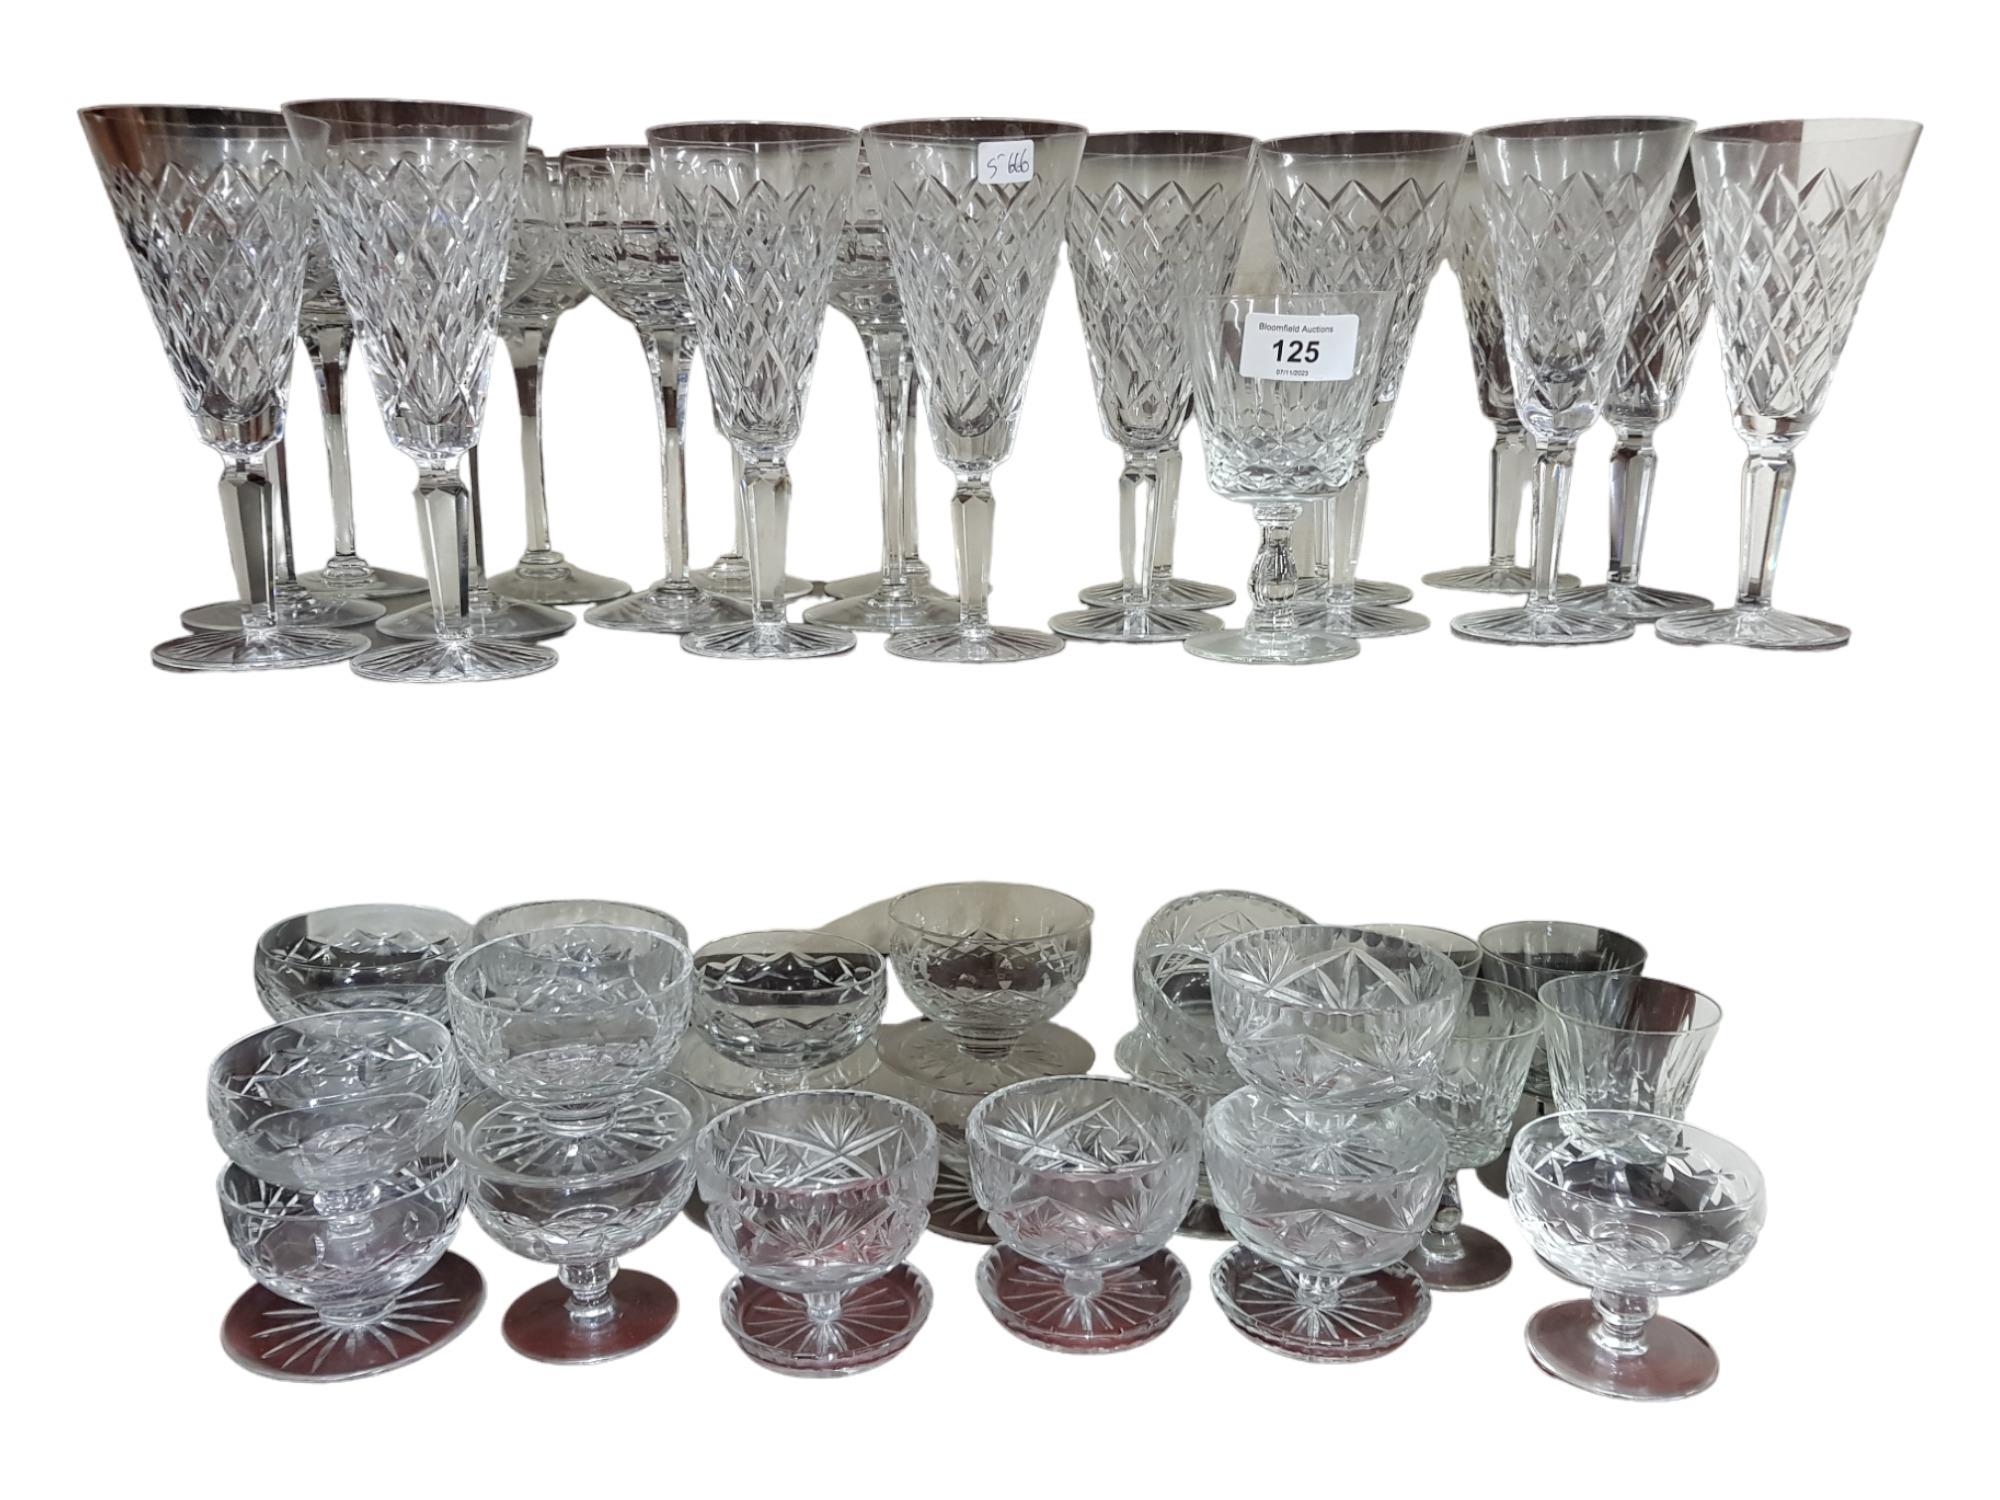 2 SHELF LOTS OF CUT GLASS AND OTHER GLASSWARE